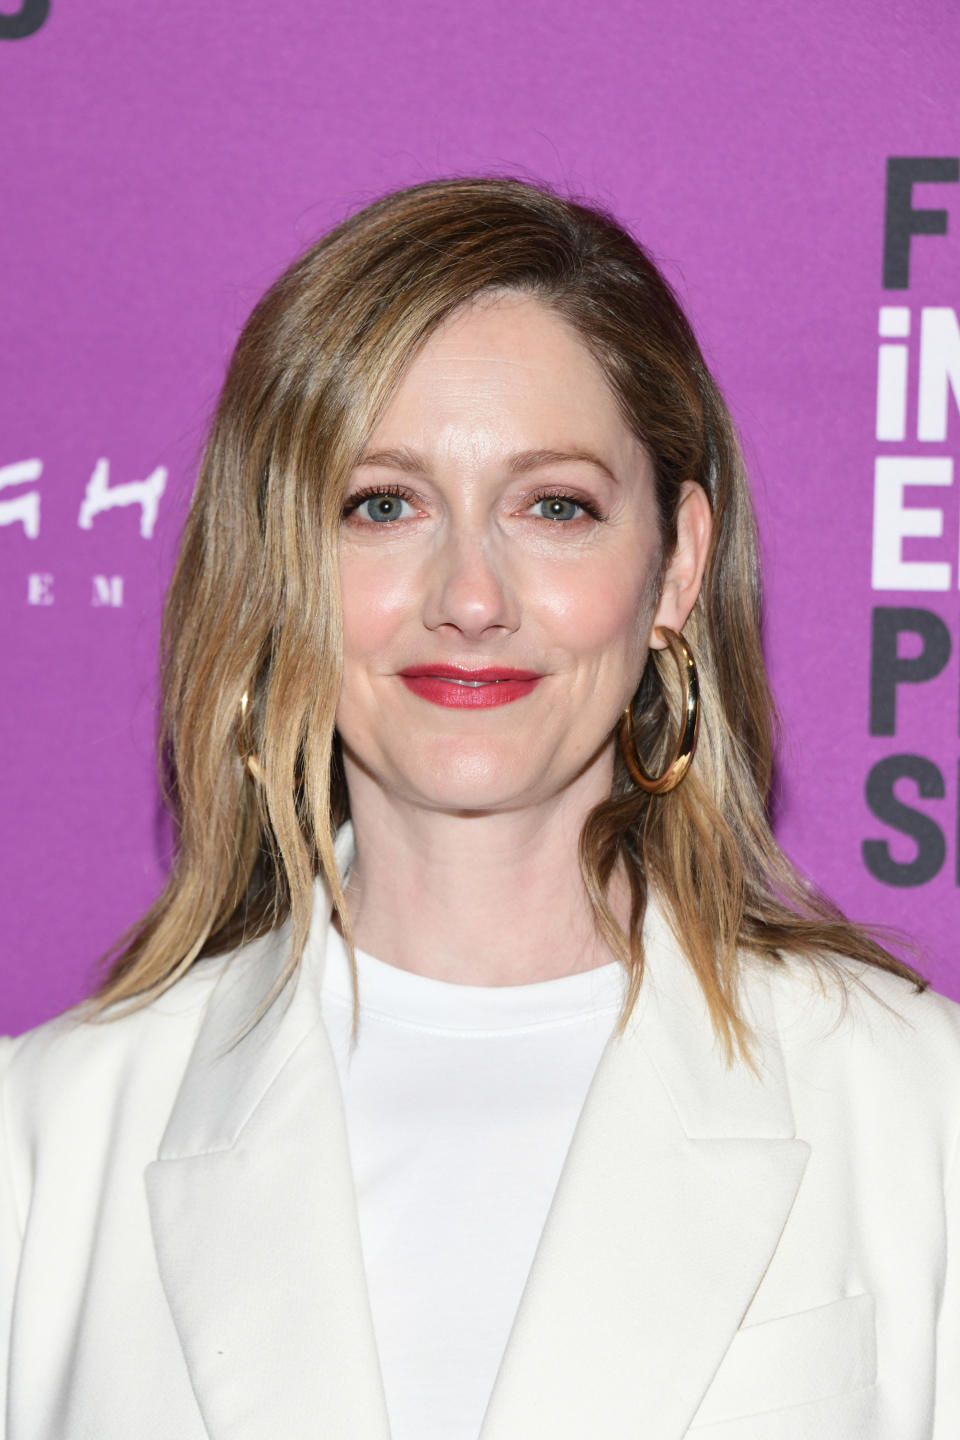 Greer at the screening for "Kidding" in 2020